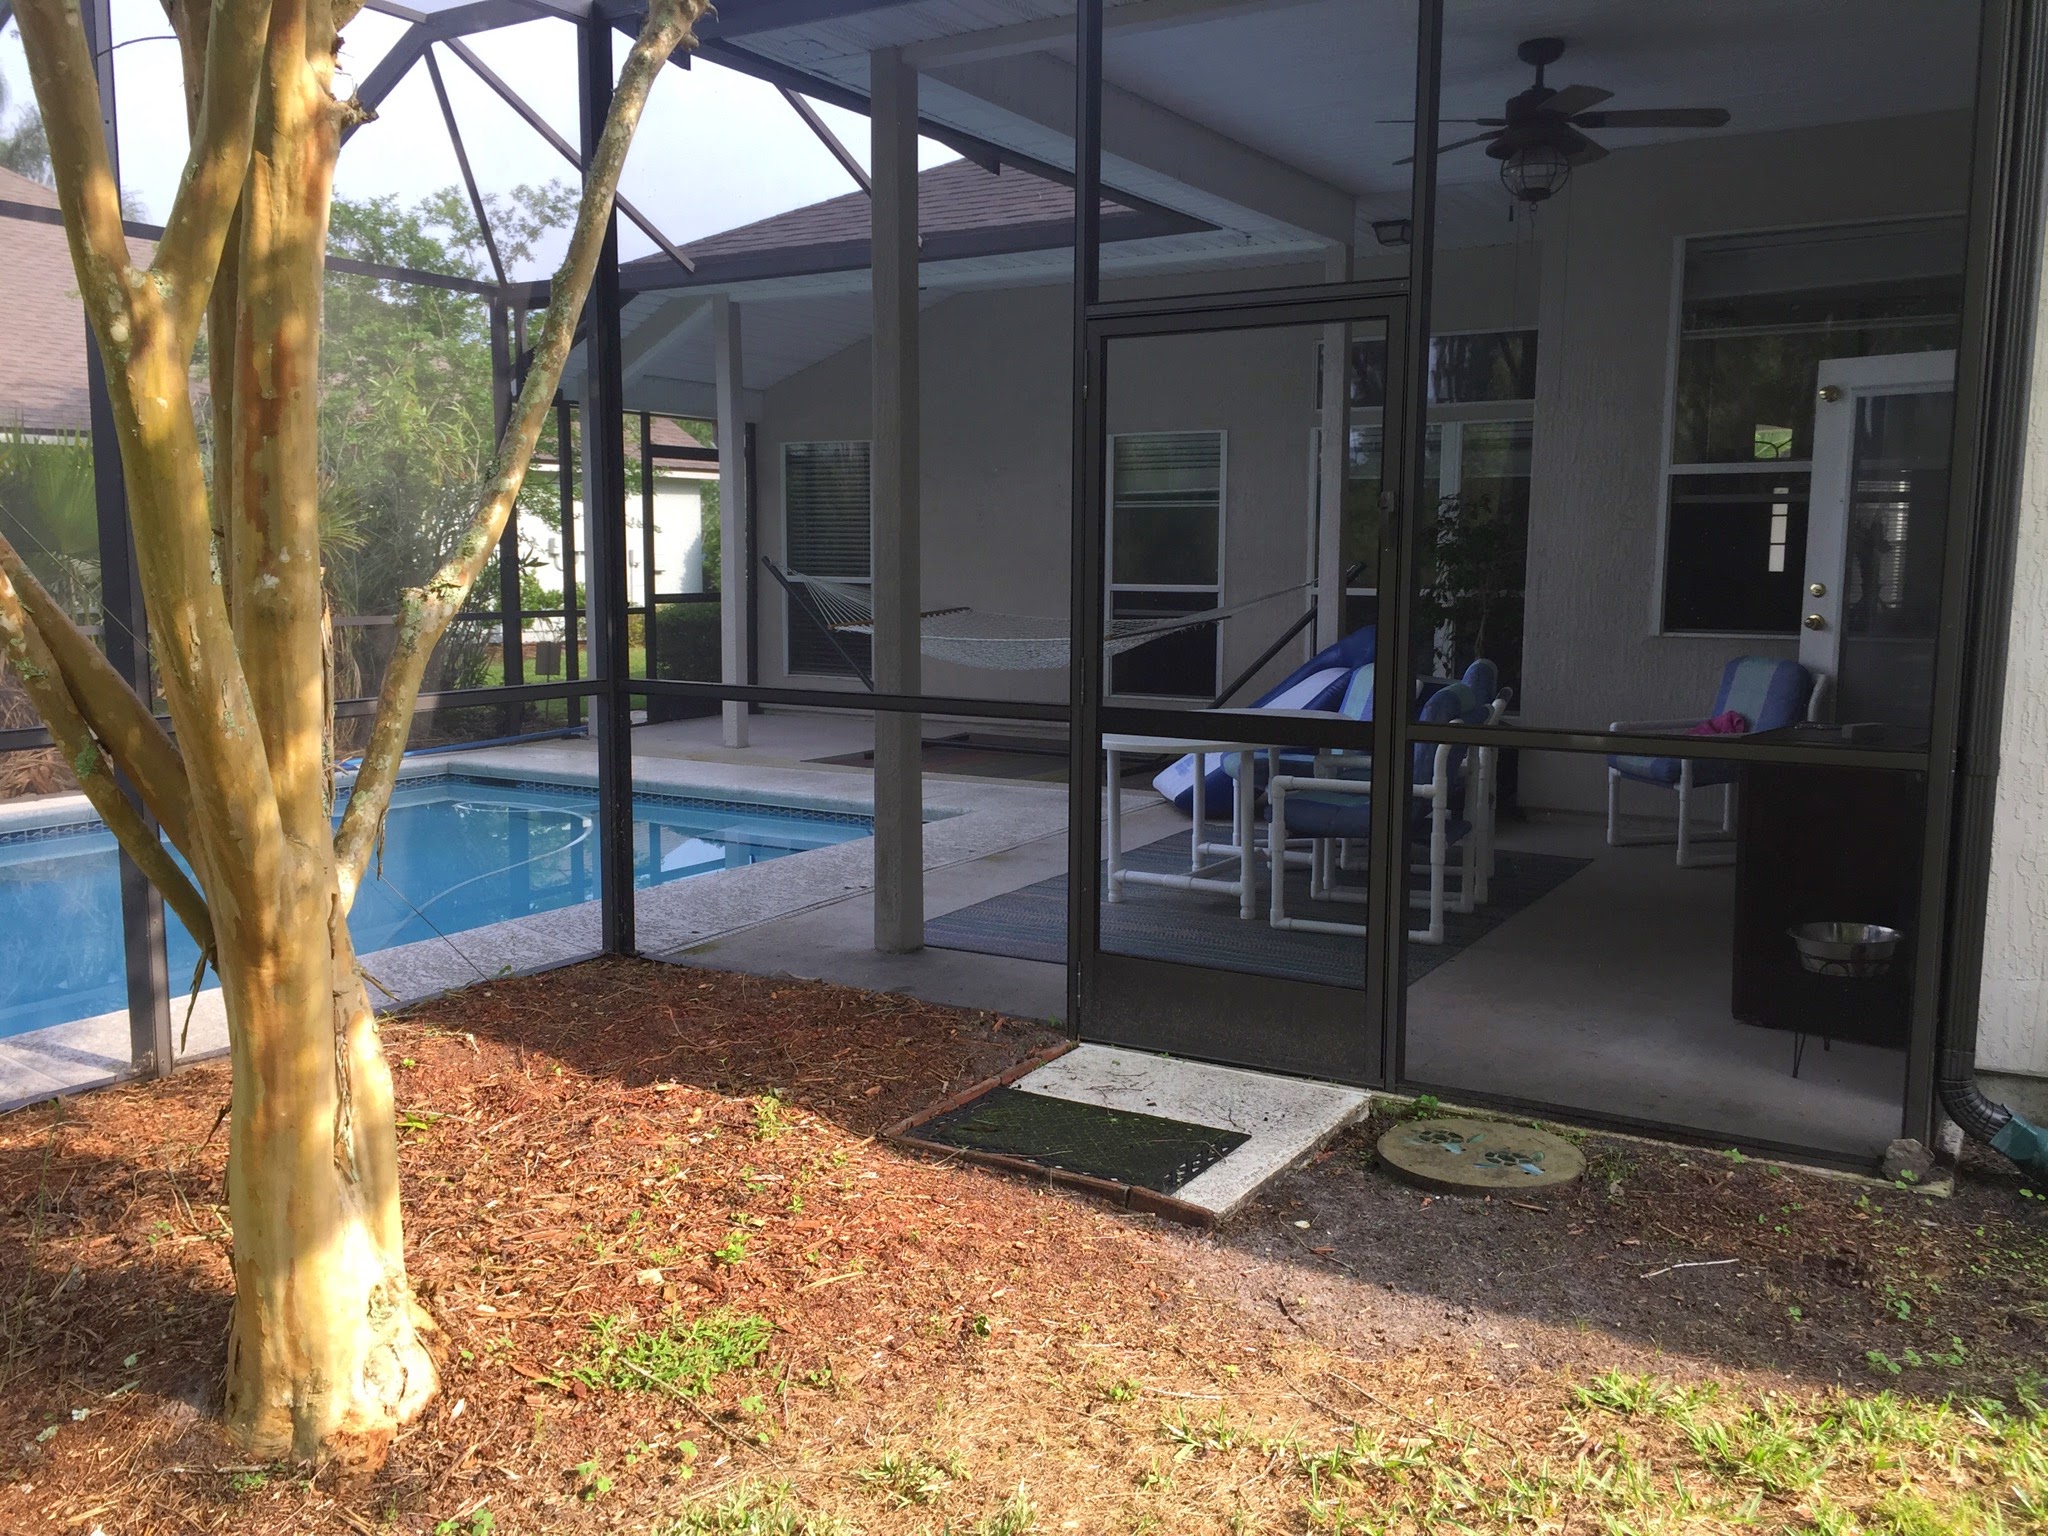  How We Turned Our Boring Backyard Into a Our Own Little Slice of Paradise | House Full of Summer backyard before and afters pool enclosure Florida home water view backyard design, coastal home, overgrown backyard, patio design, pool and pond 